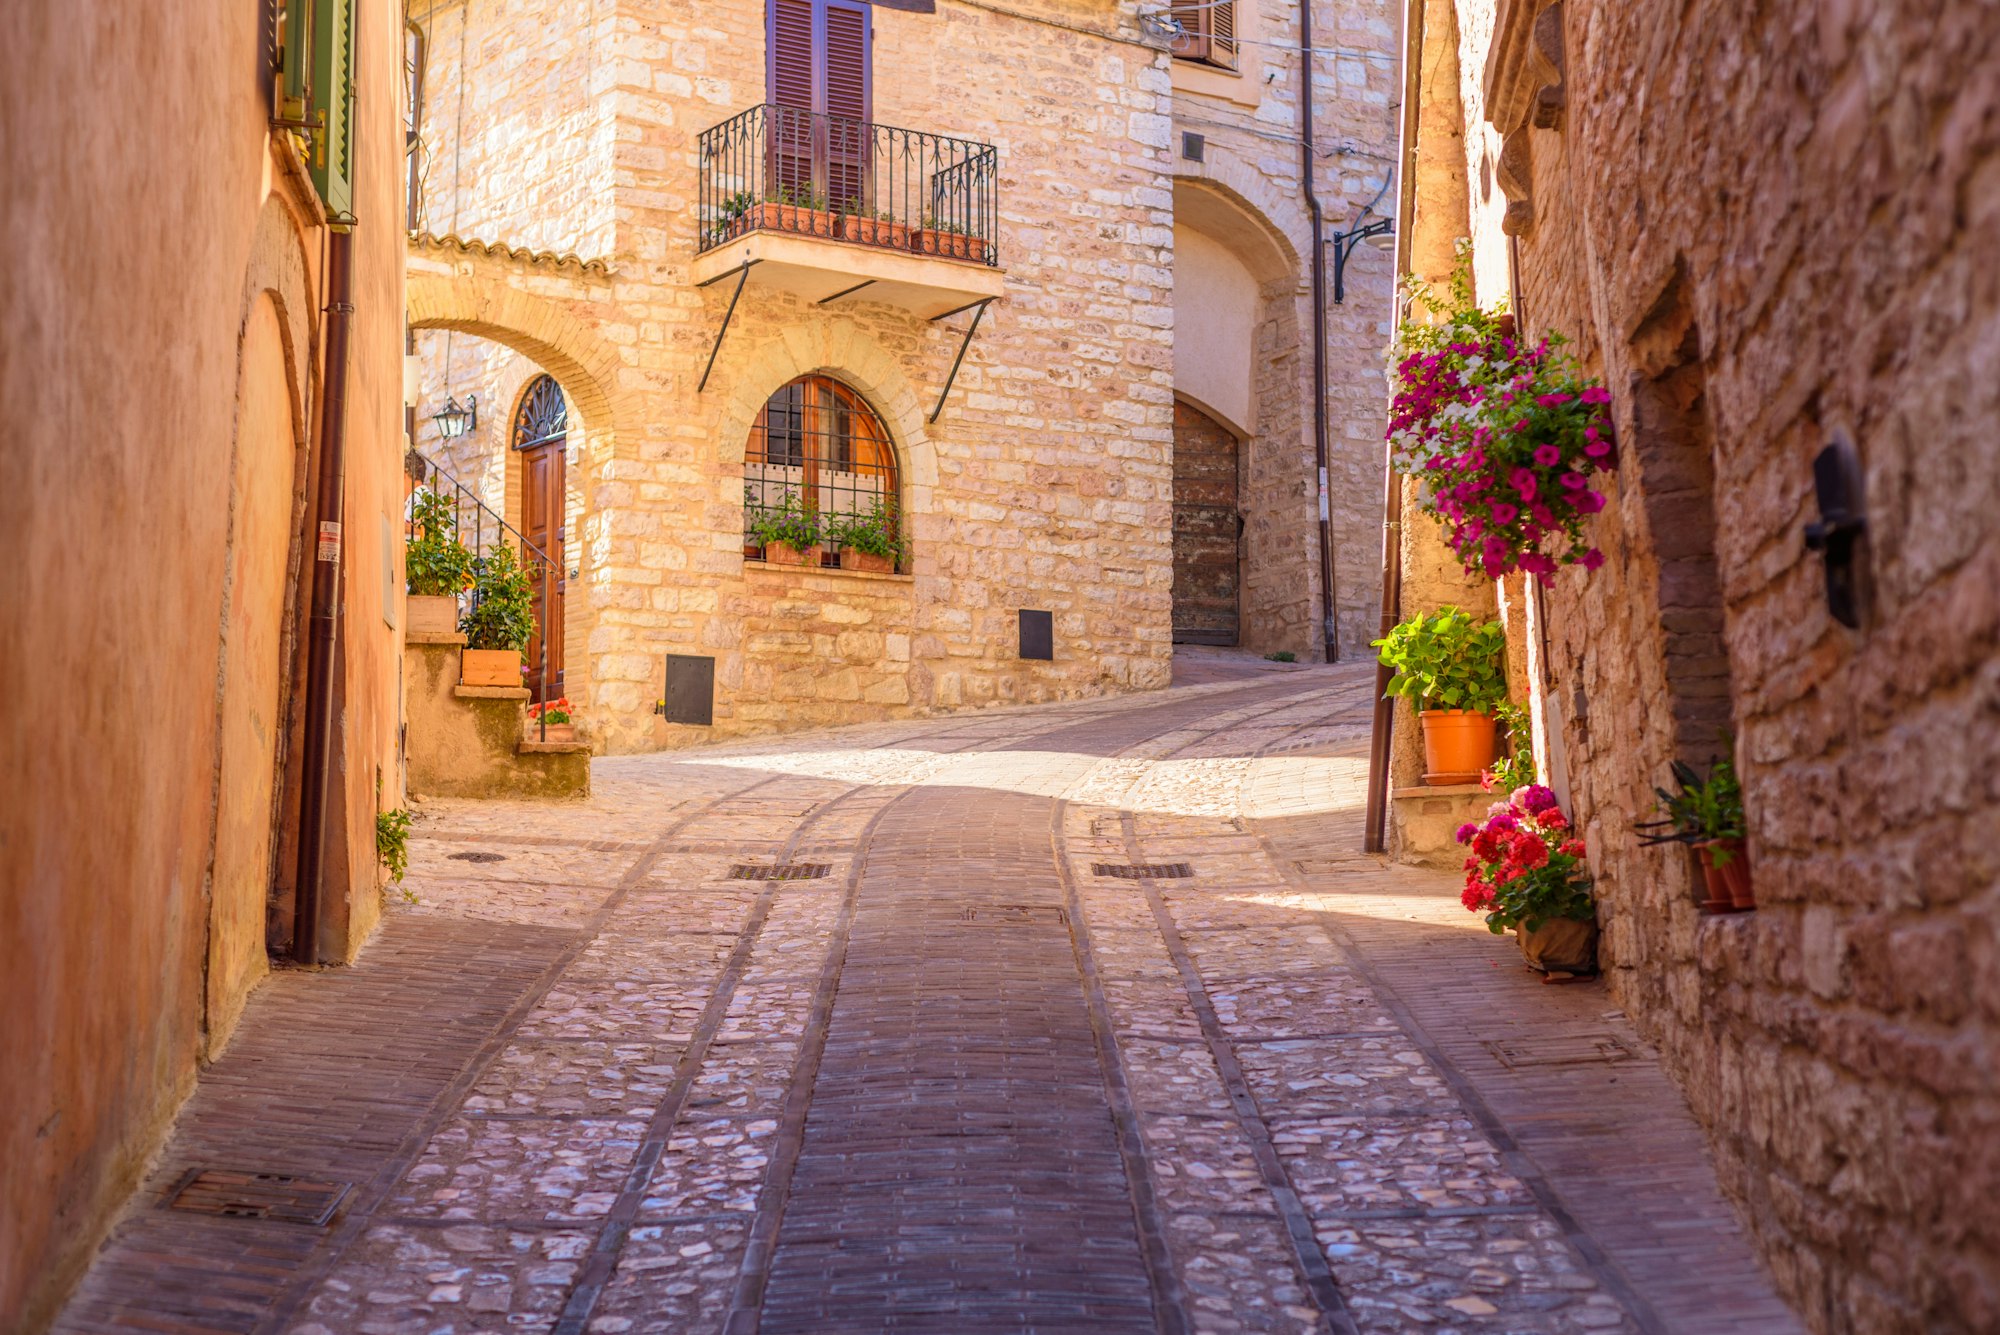 Beautiful view of an alley with stone buildings decorated with the flowers in Spello, Italy